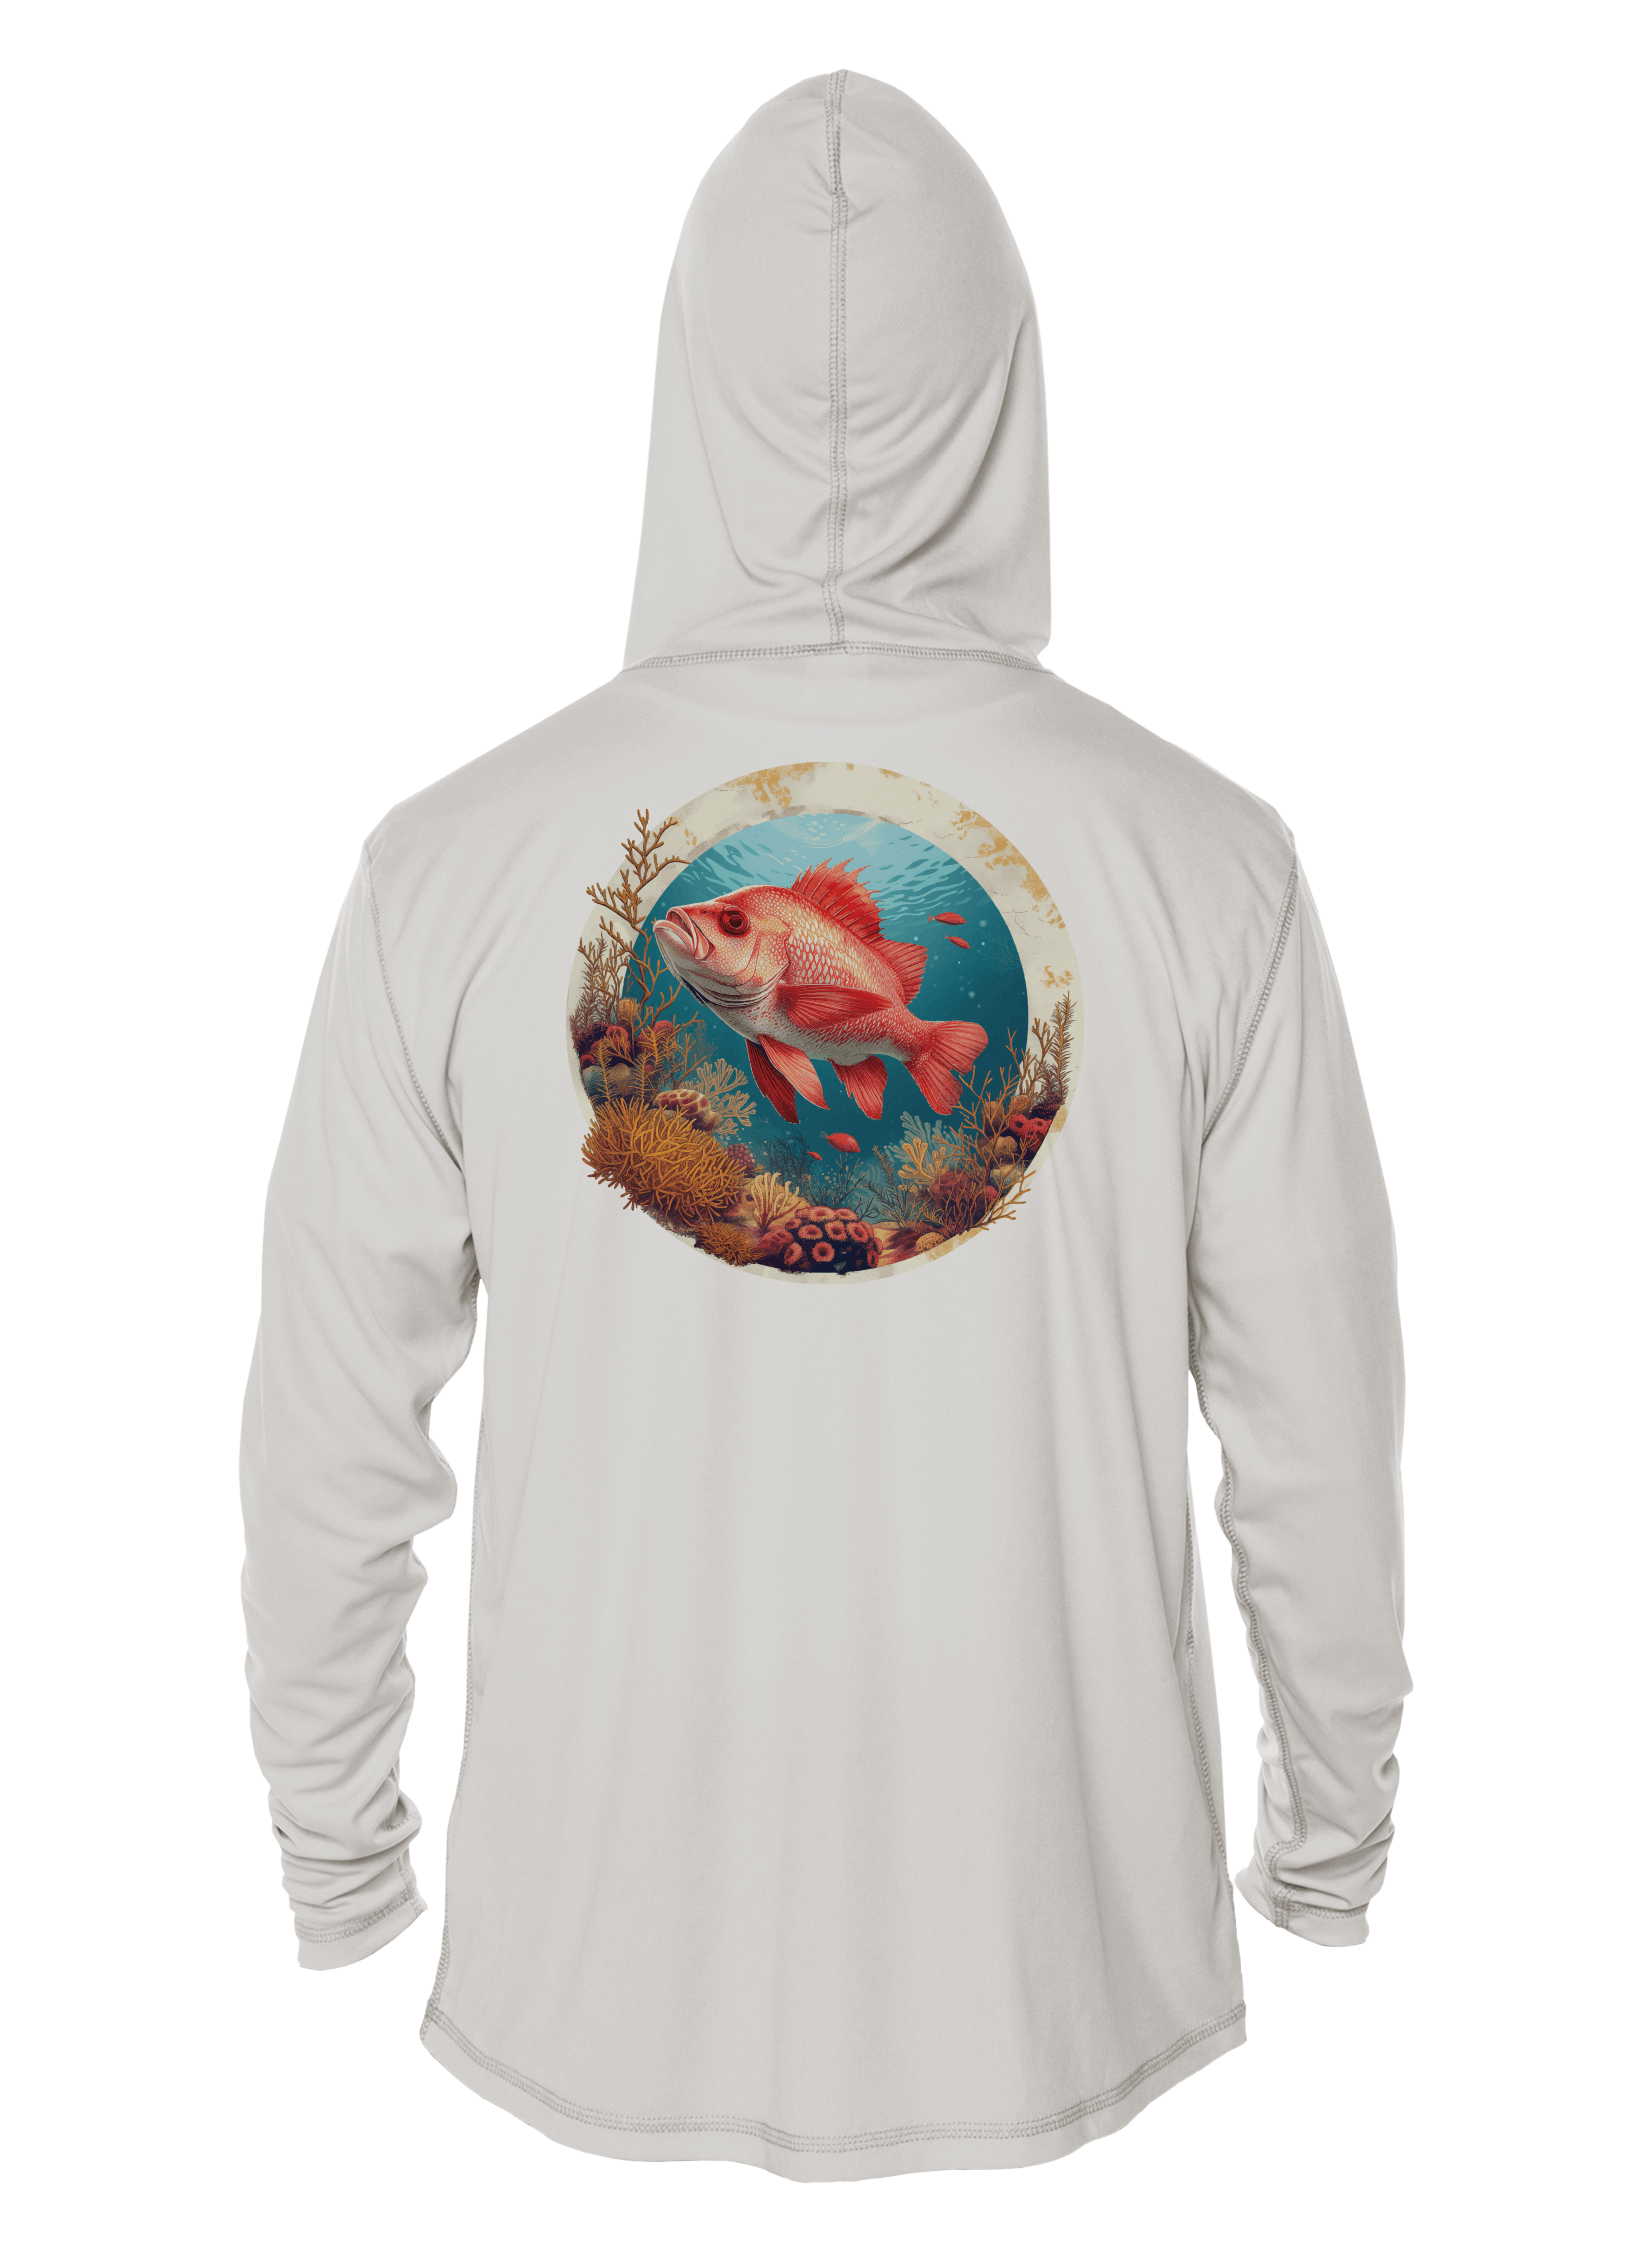 Fishing Shirt Outfitters - Angler's Collection: Red Snapper - UPF 50+ Hoodie - White,MED